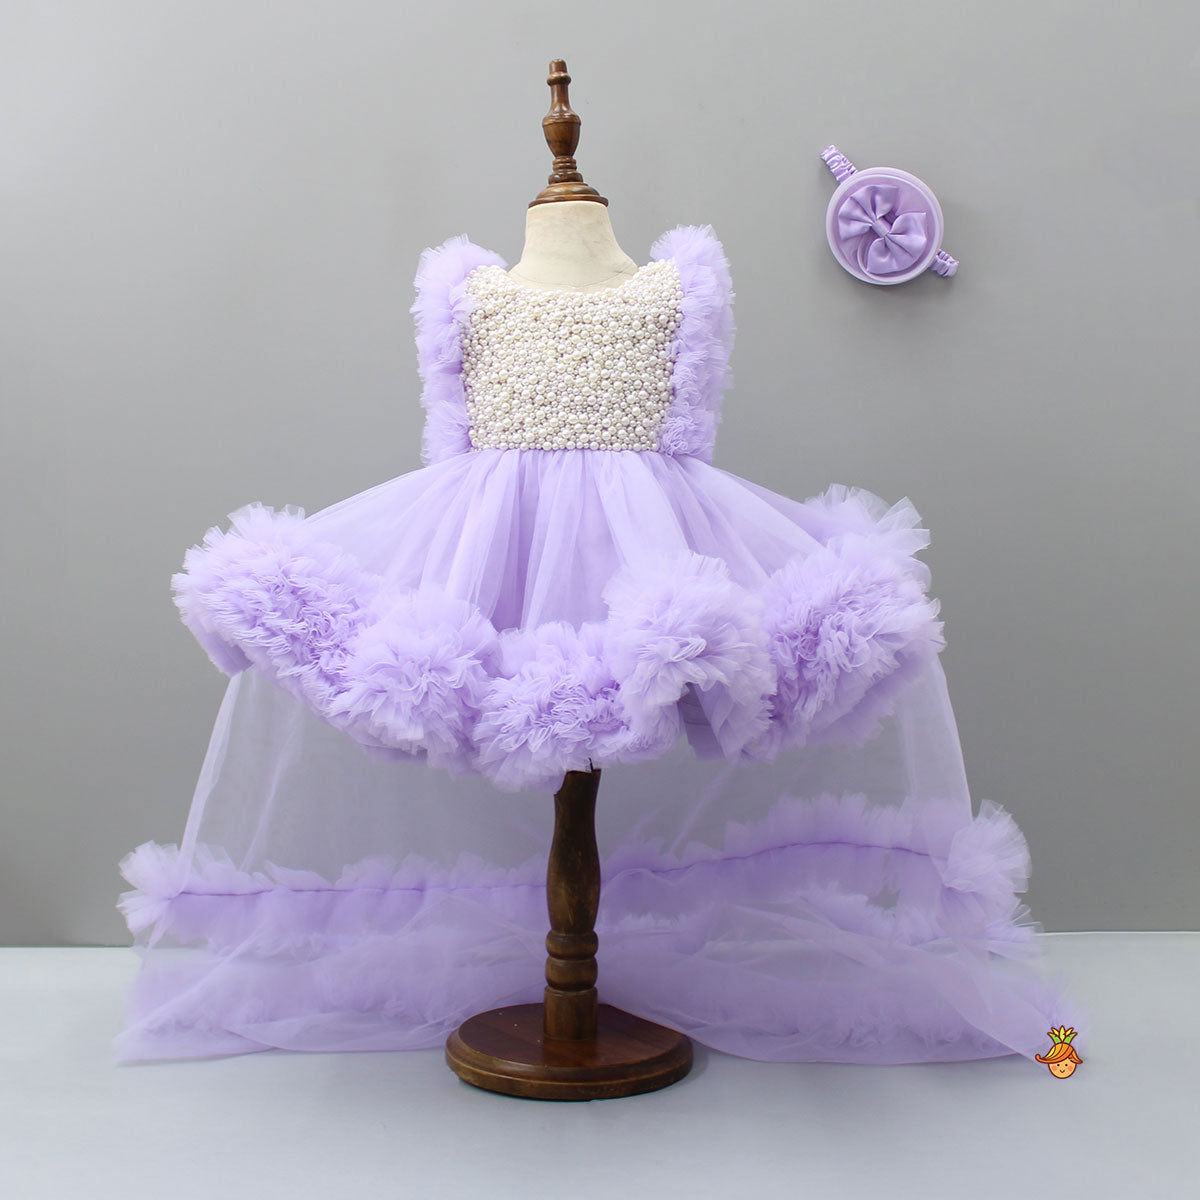 Embroidered Yoke Ruffle Hem Lavender Dress With Detachable Trail And Matching Head Band